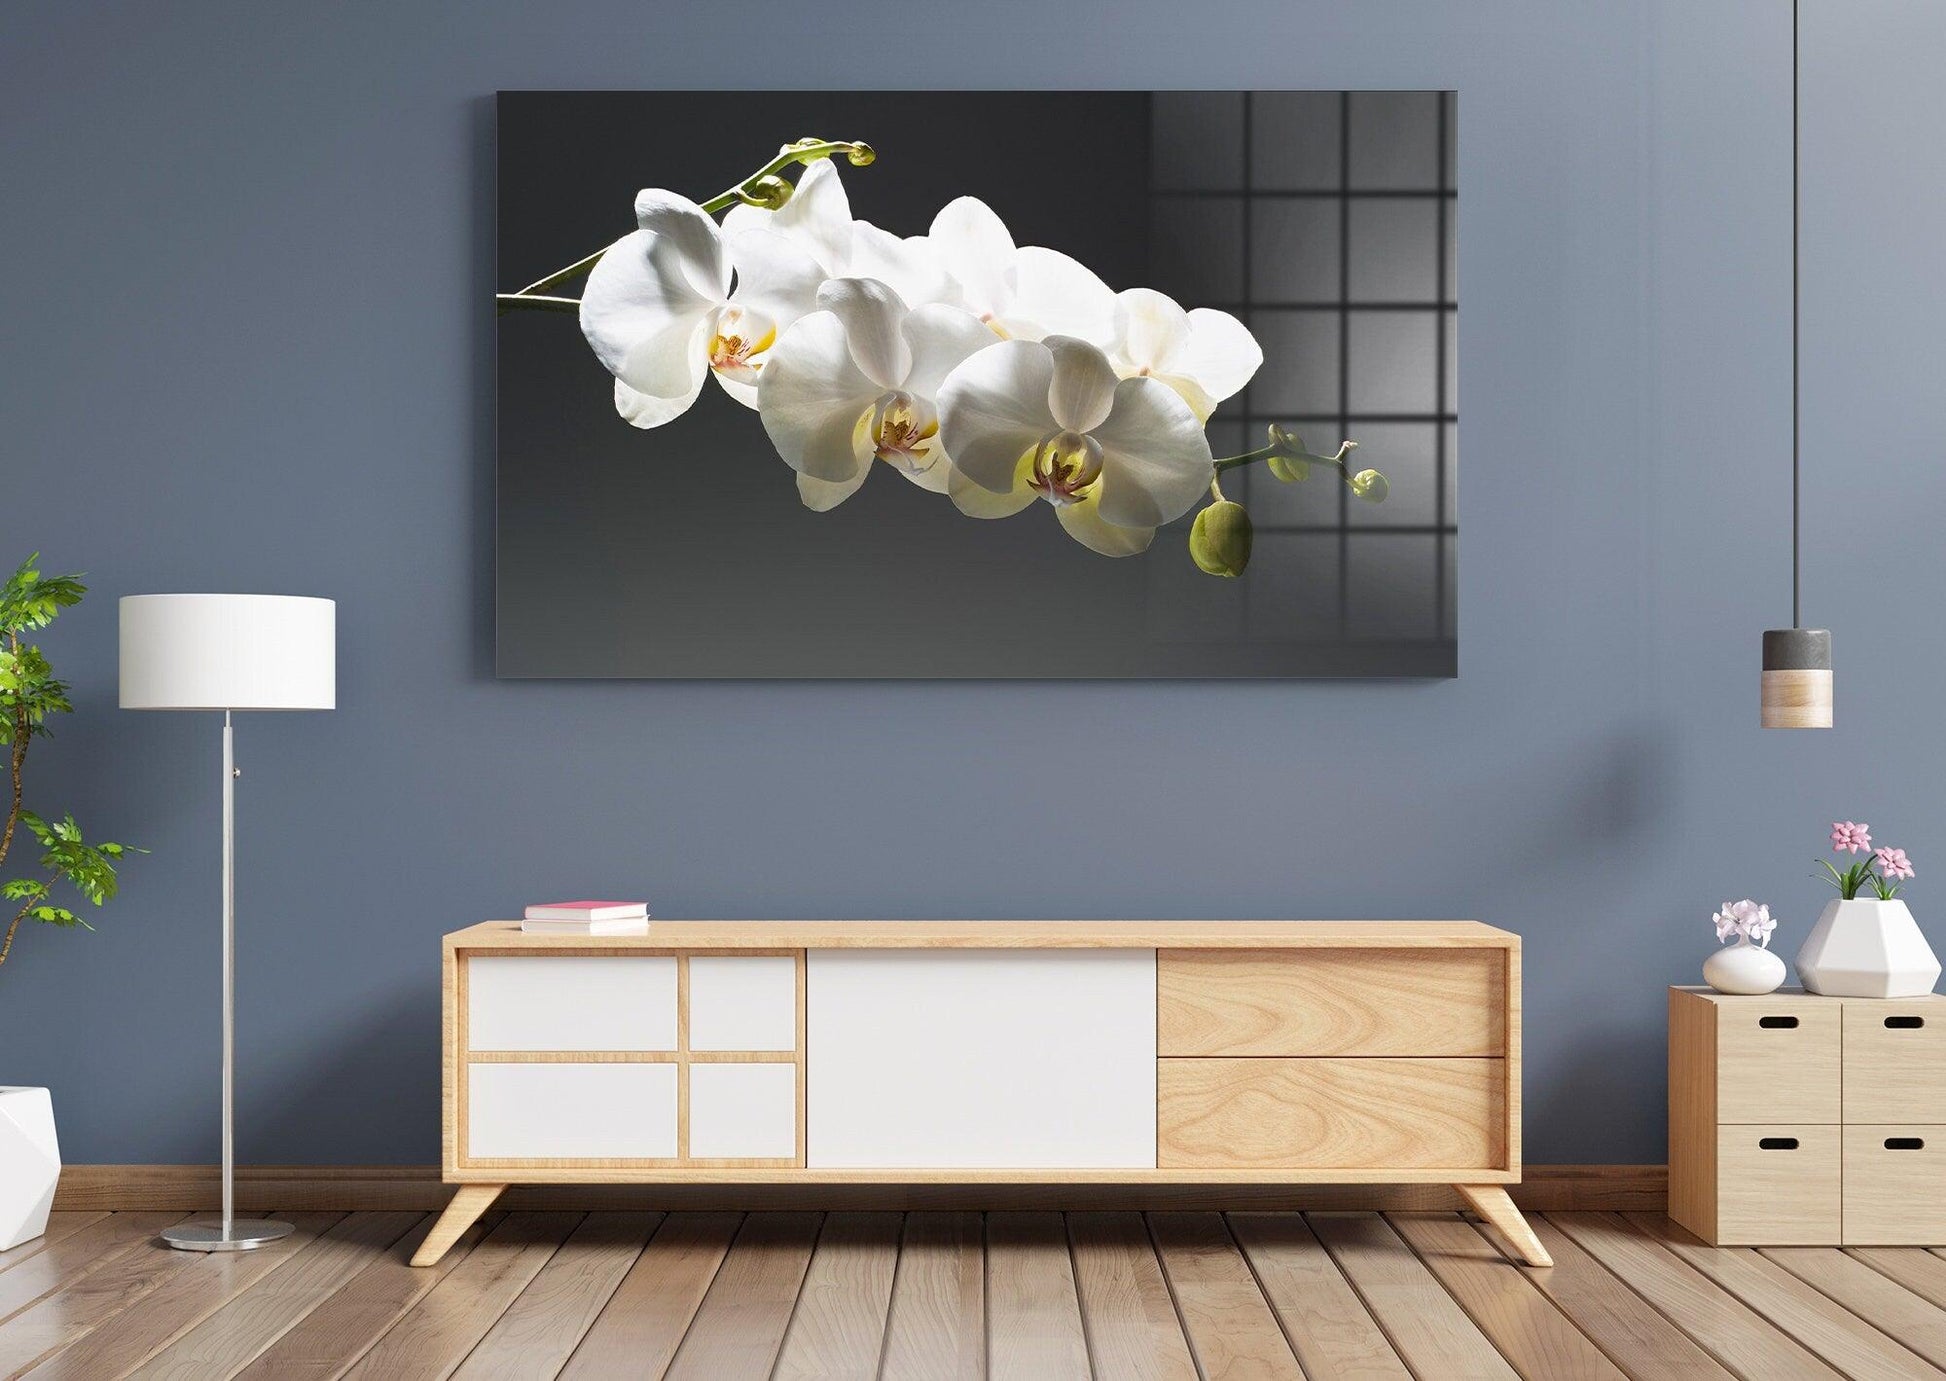 Flowers Tempered Glass Printing Wall Art| Natural And Vivid Wall Decor, White Flowers Landscape, Flowers glass wall decor, Housewarming Gift - TrendiArt